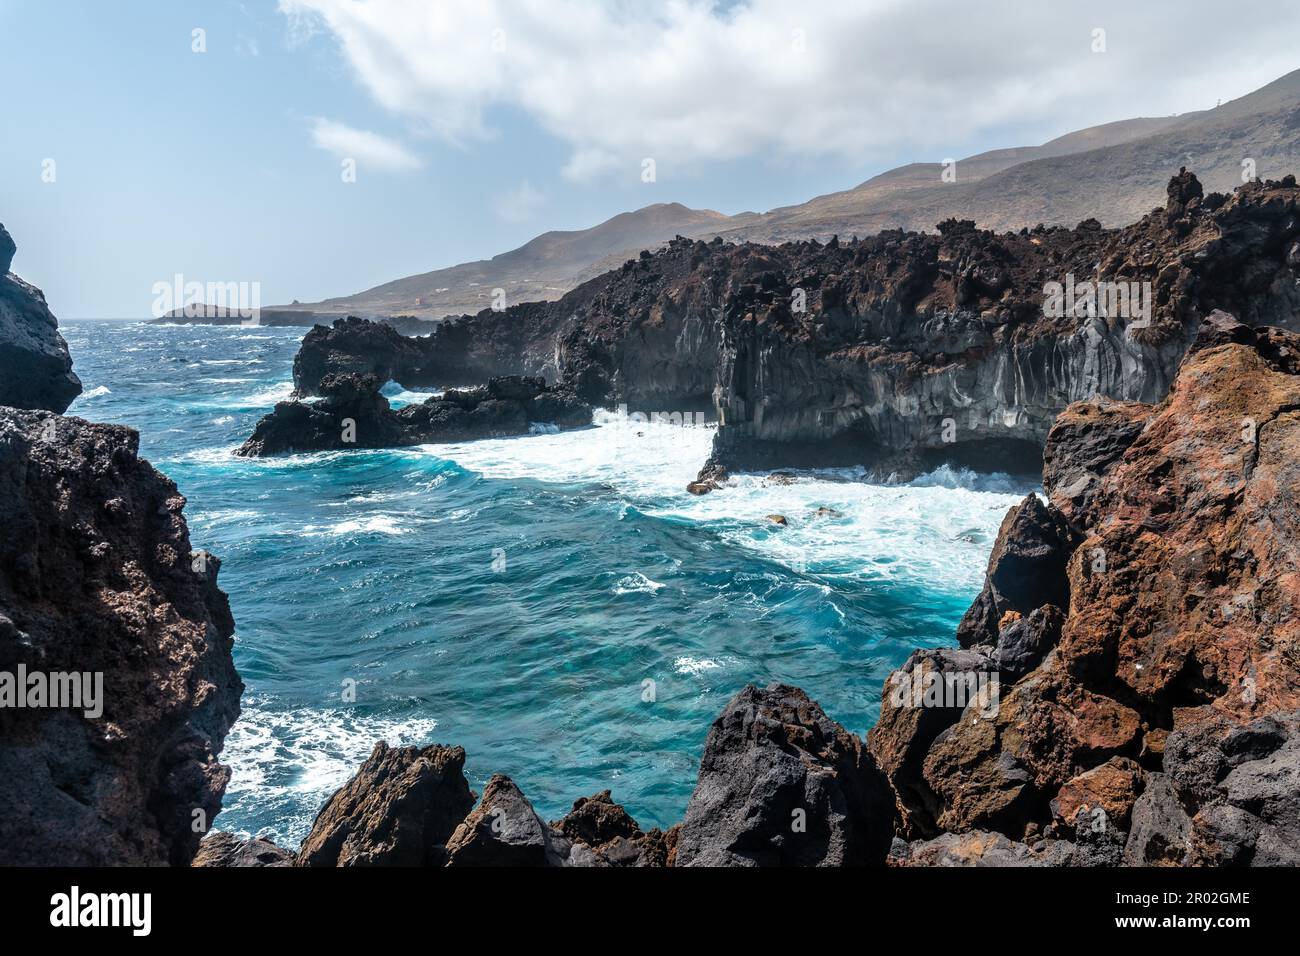 Views of the cliffs from the volcanic trail in the town of Tamaduste on the coast of the island of El Hierro, Canary Islands, Spain Stock Photo